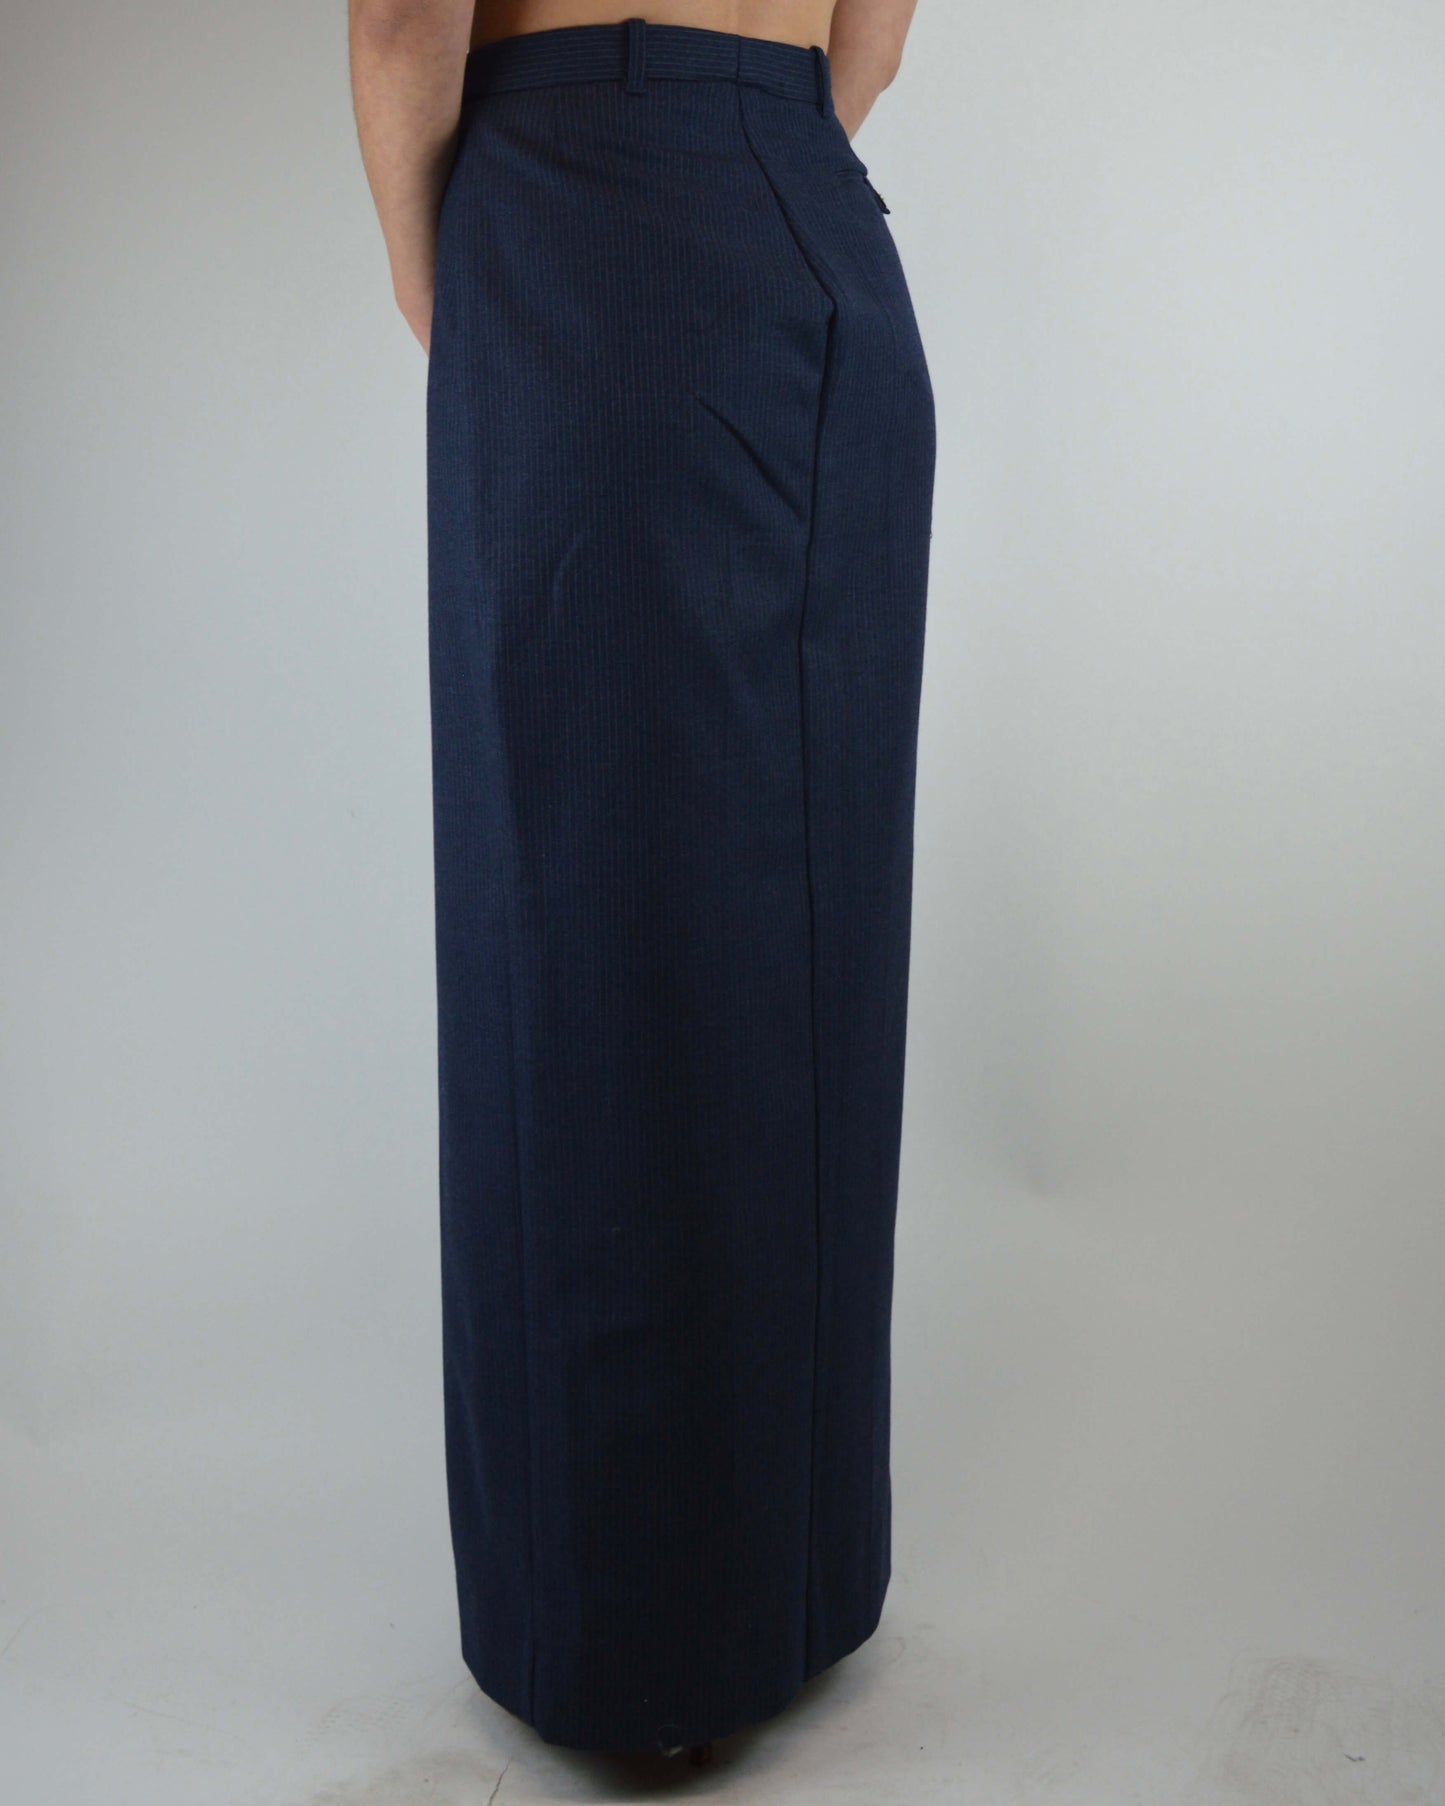 Long Skirt - Blue White Lines Thick (S/M)